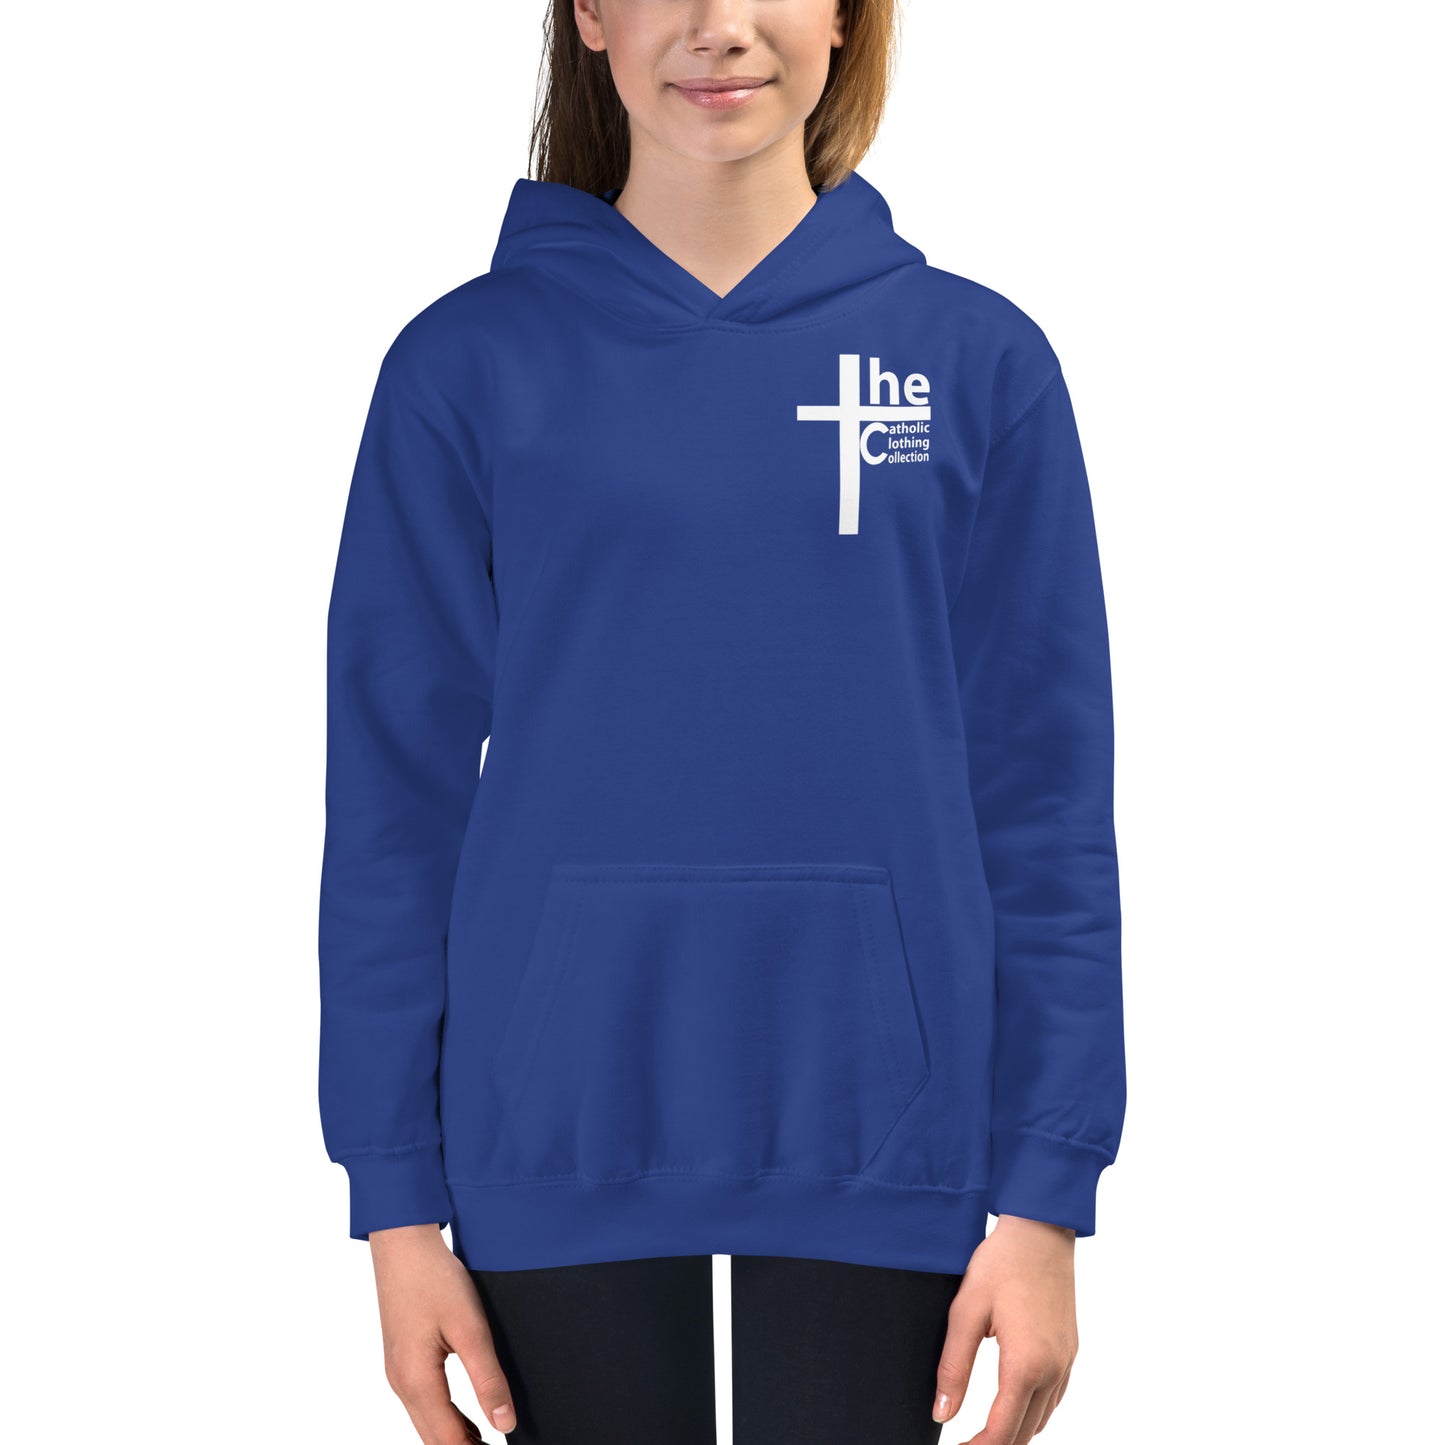 Our Lady of Mount Carmel Children's Hoodie